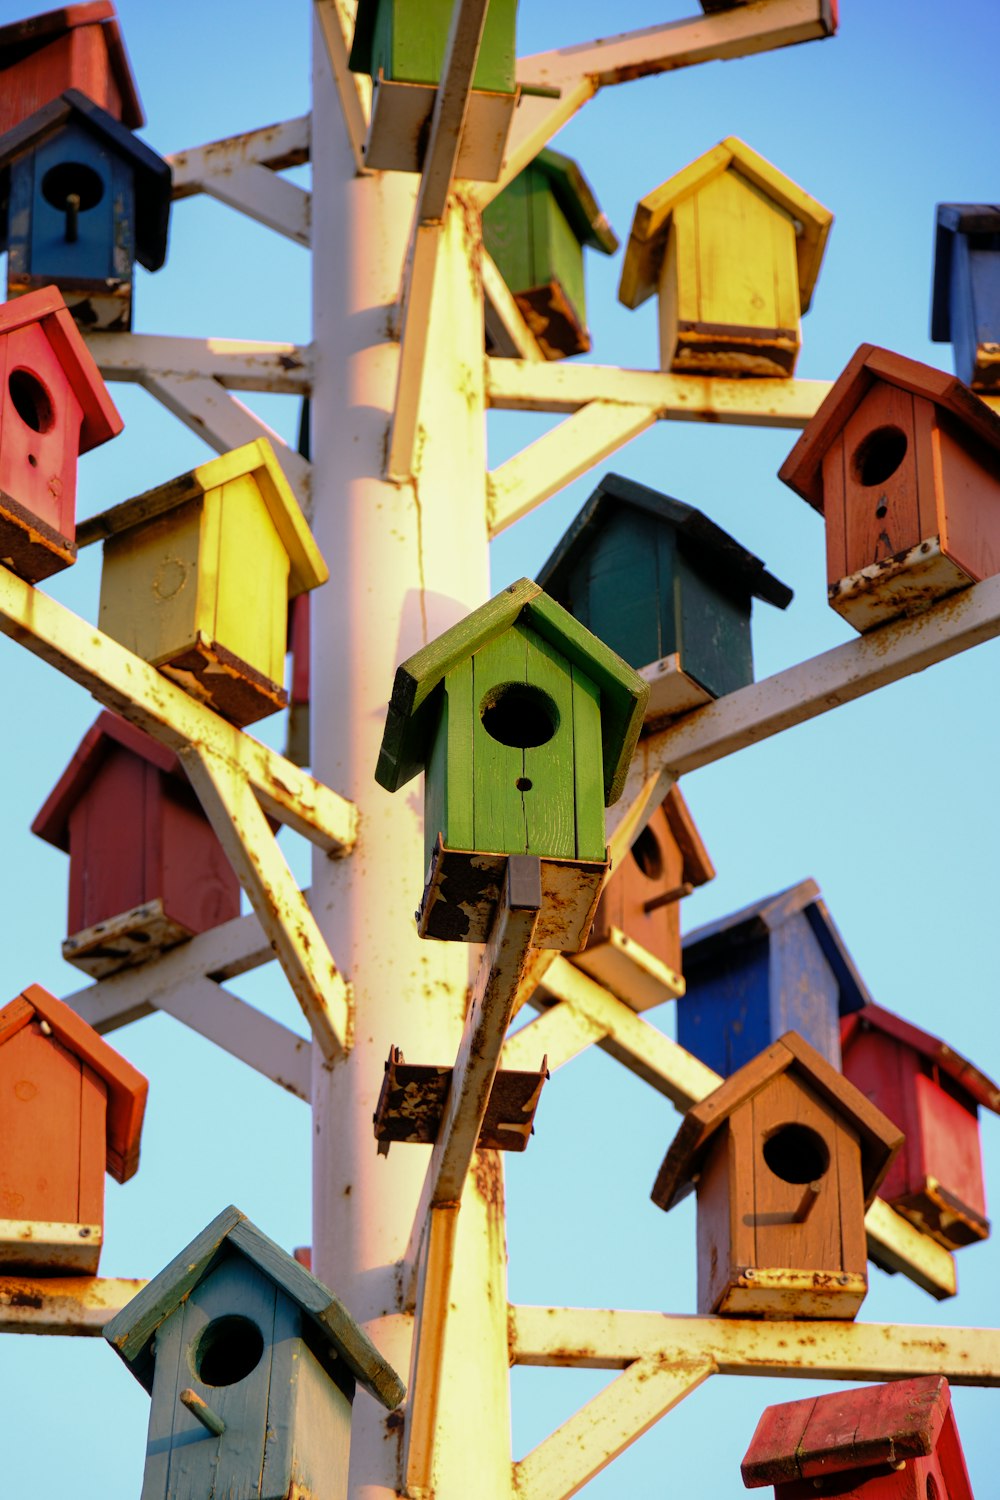 a bunch of colorful bird houses on a pole